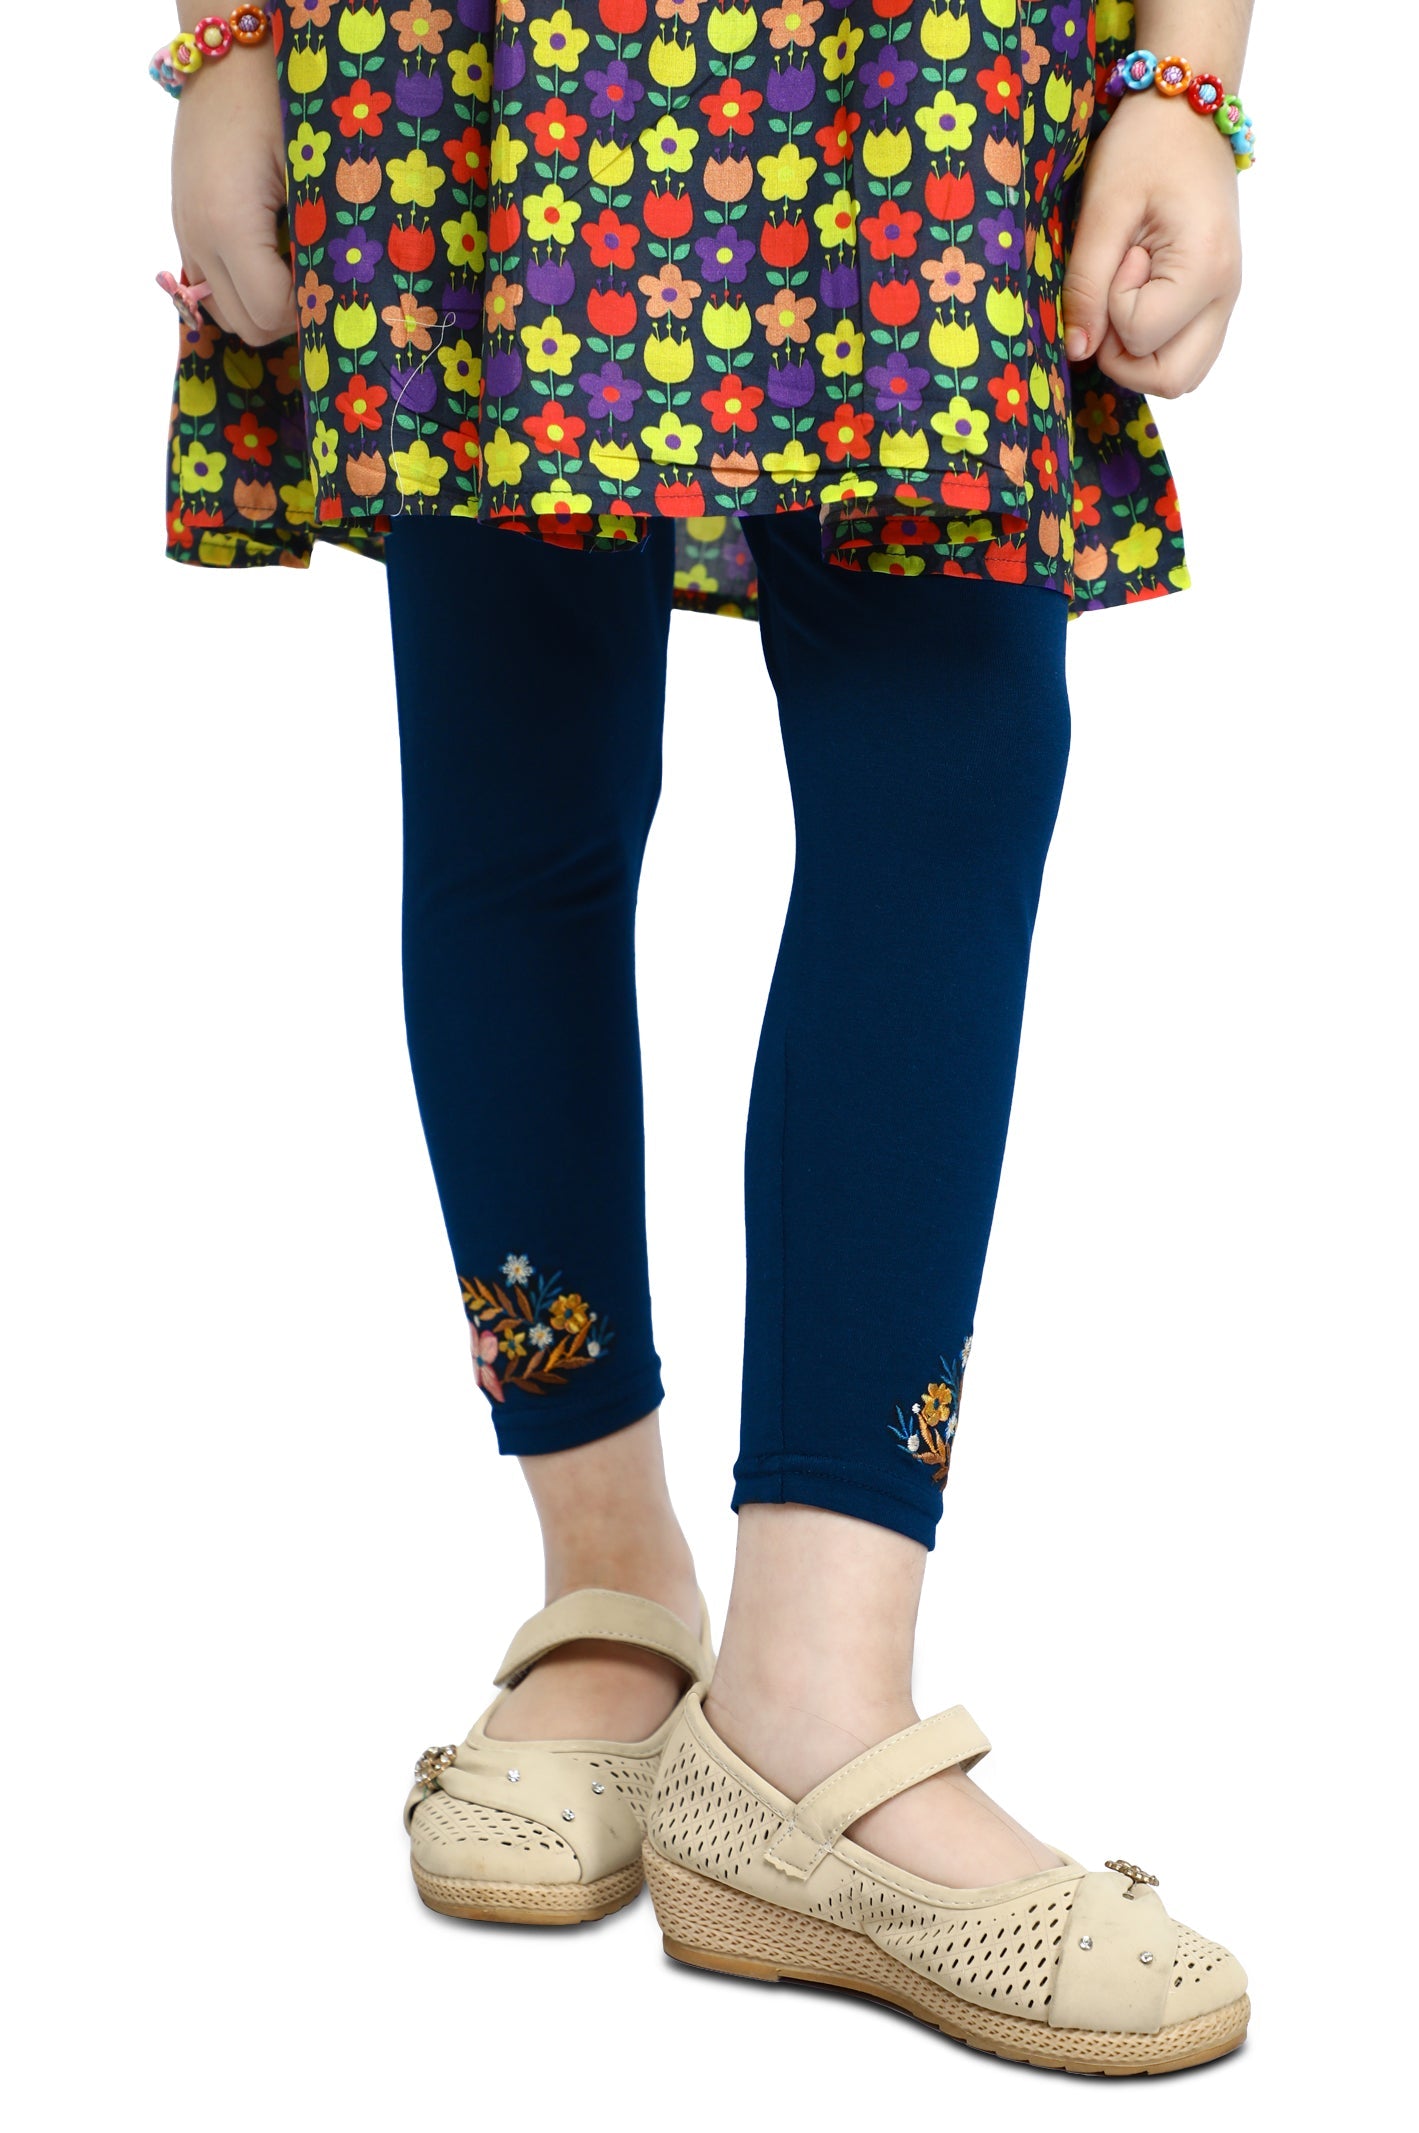 Tights For Toddler Girls In Navy SKU: IGT-0003-NAVY - Diners